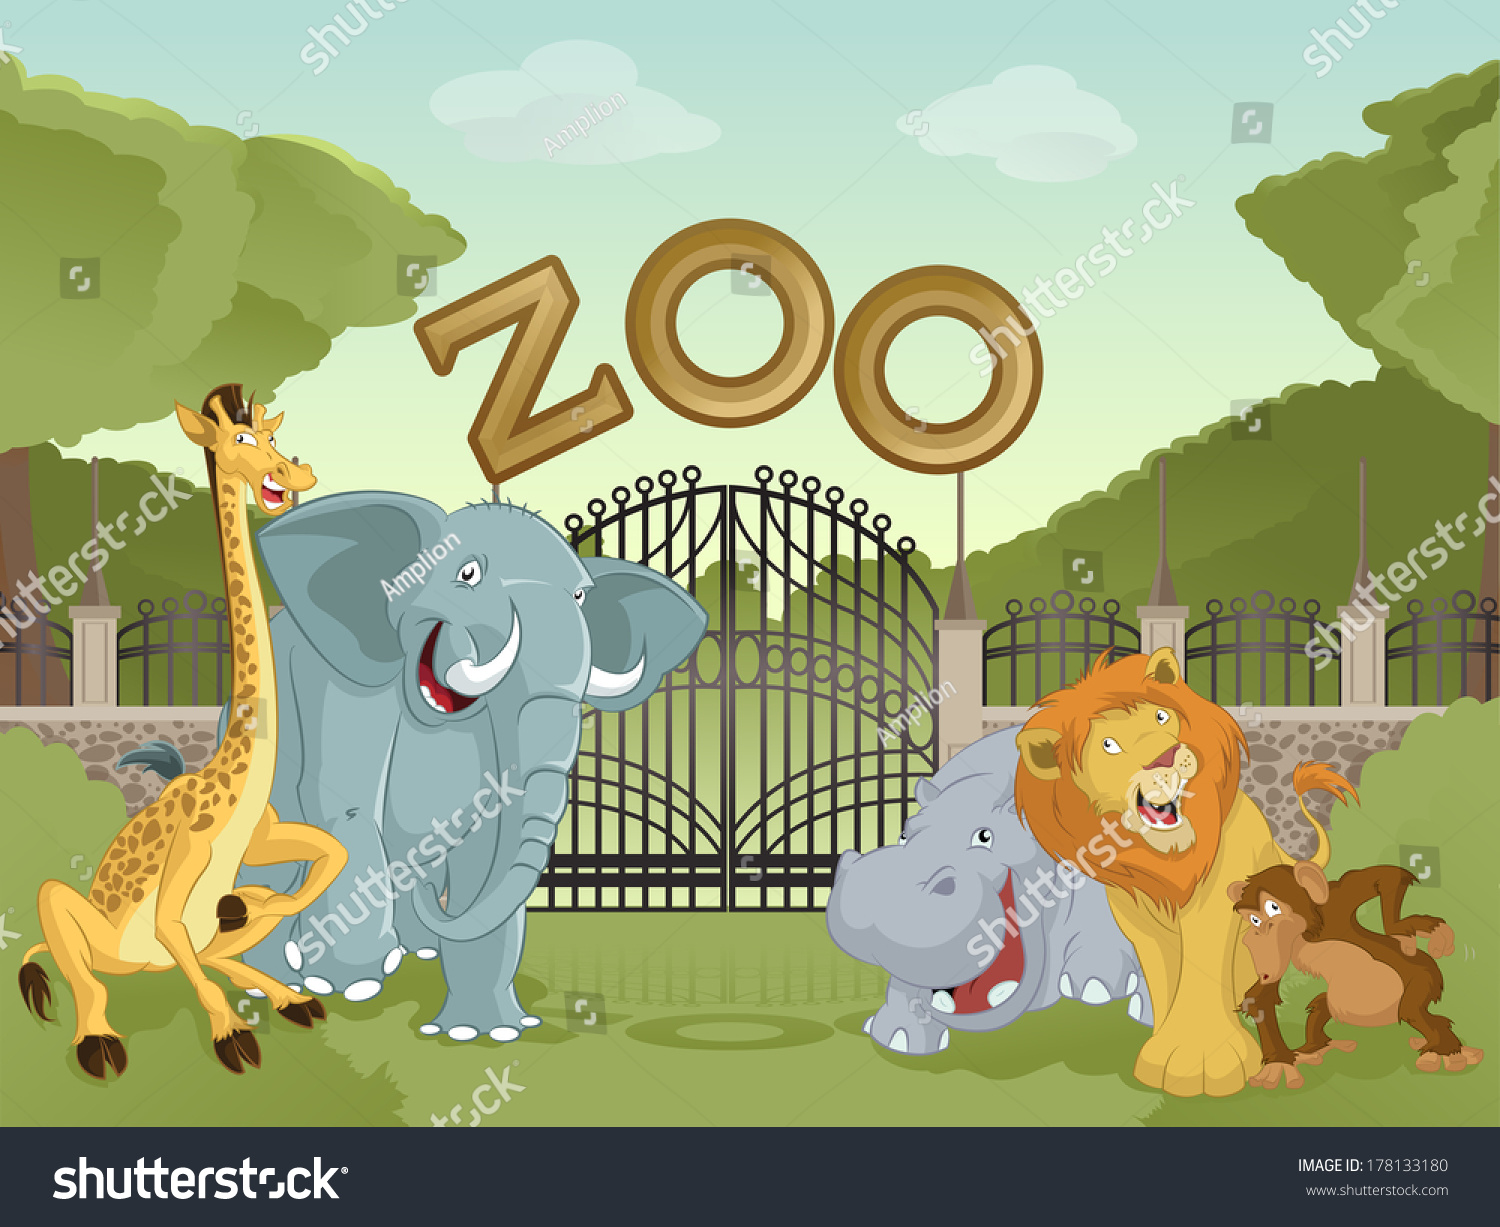 zoo background clipart - photo #24